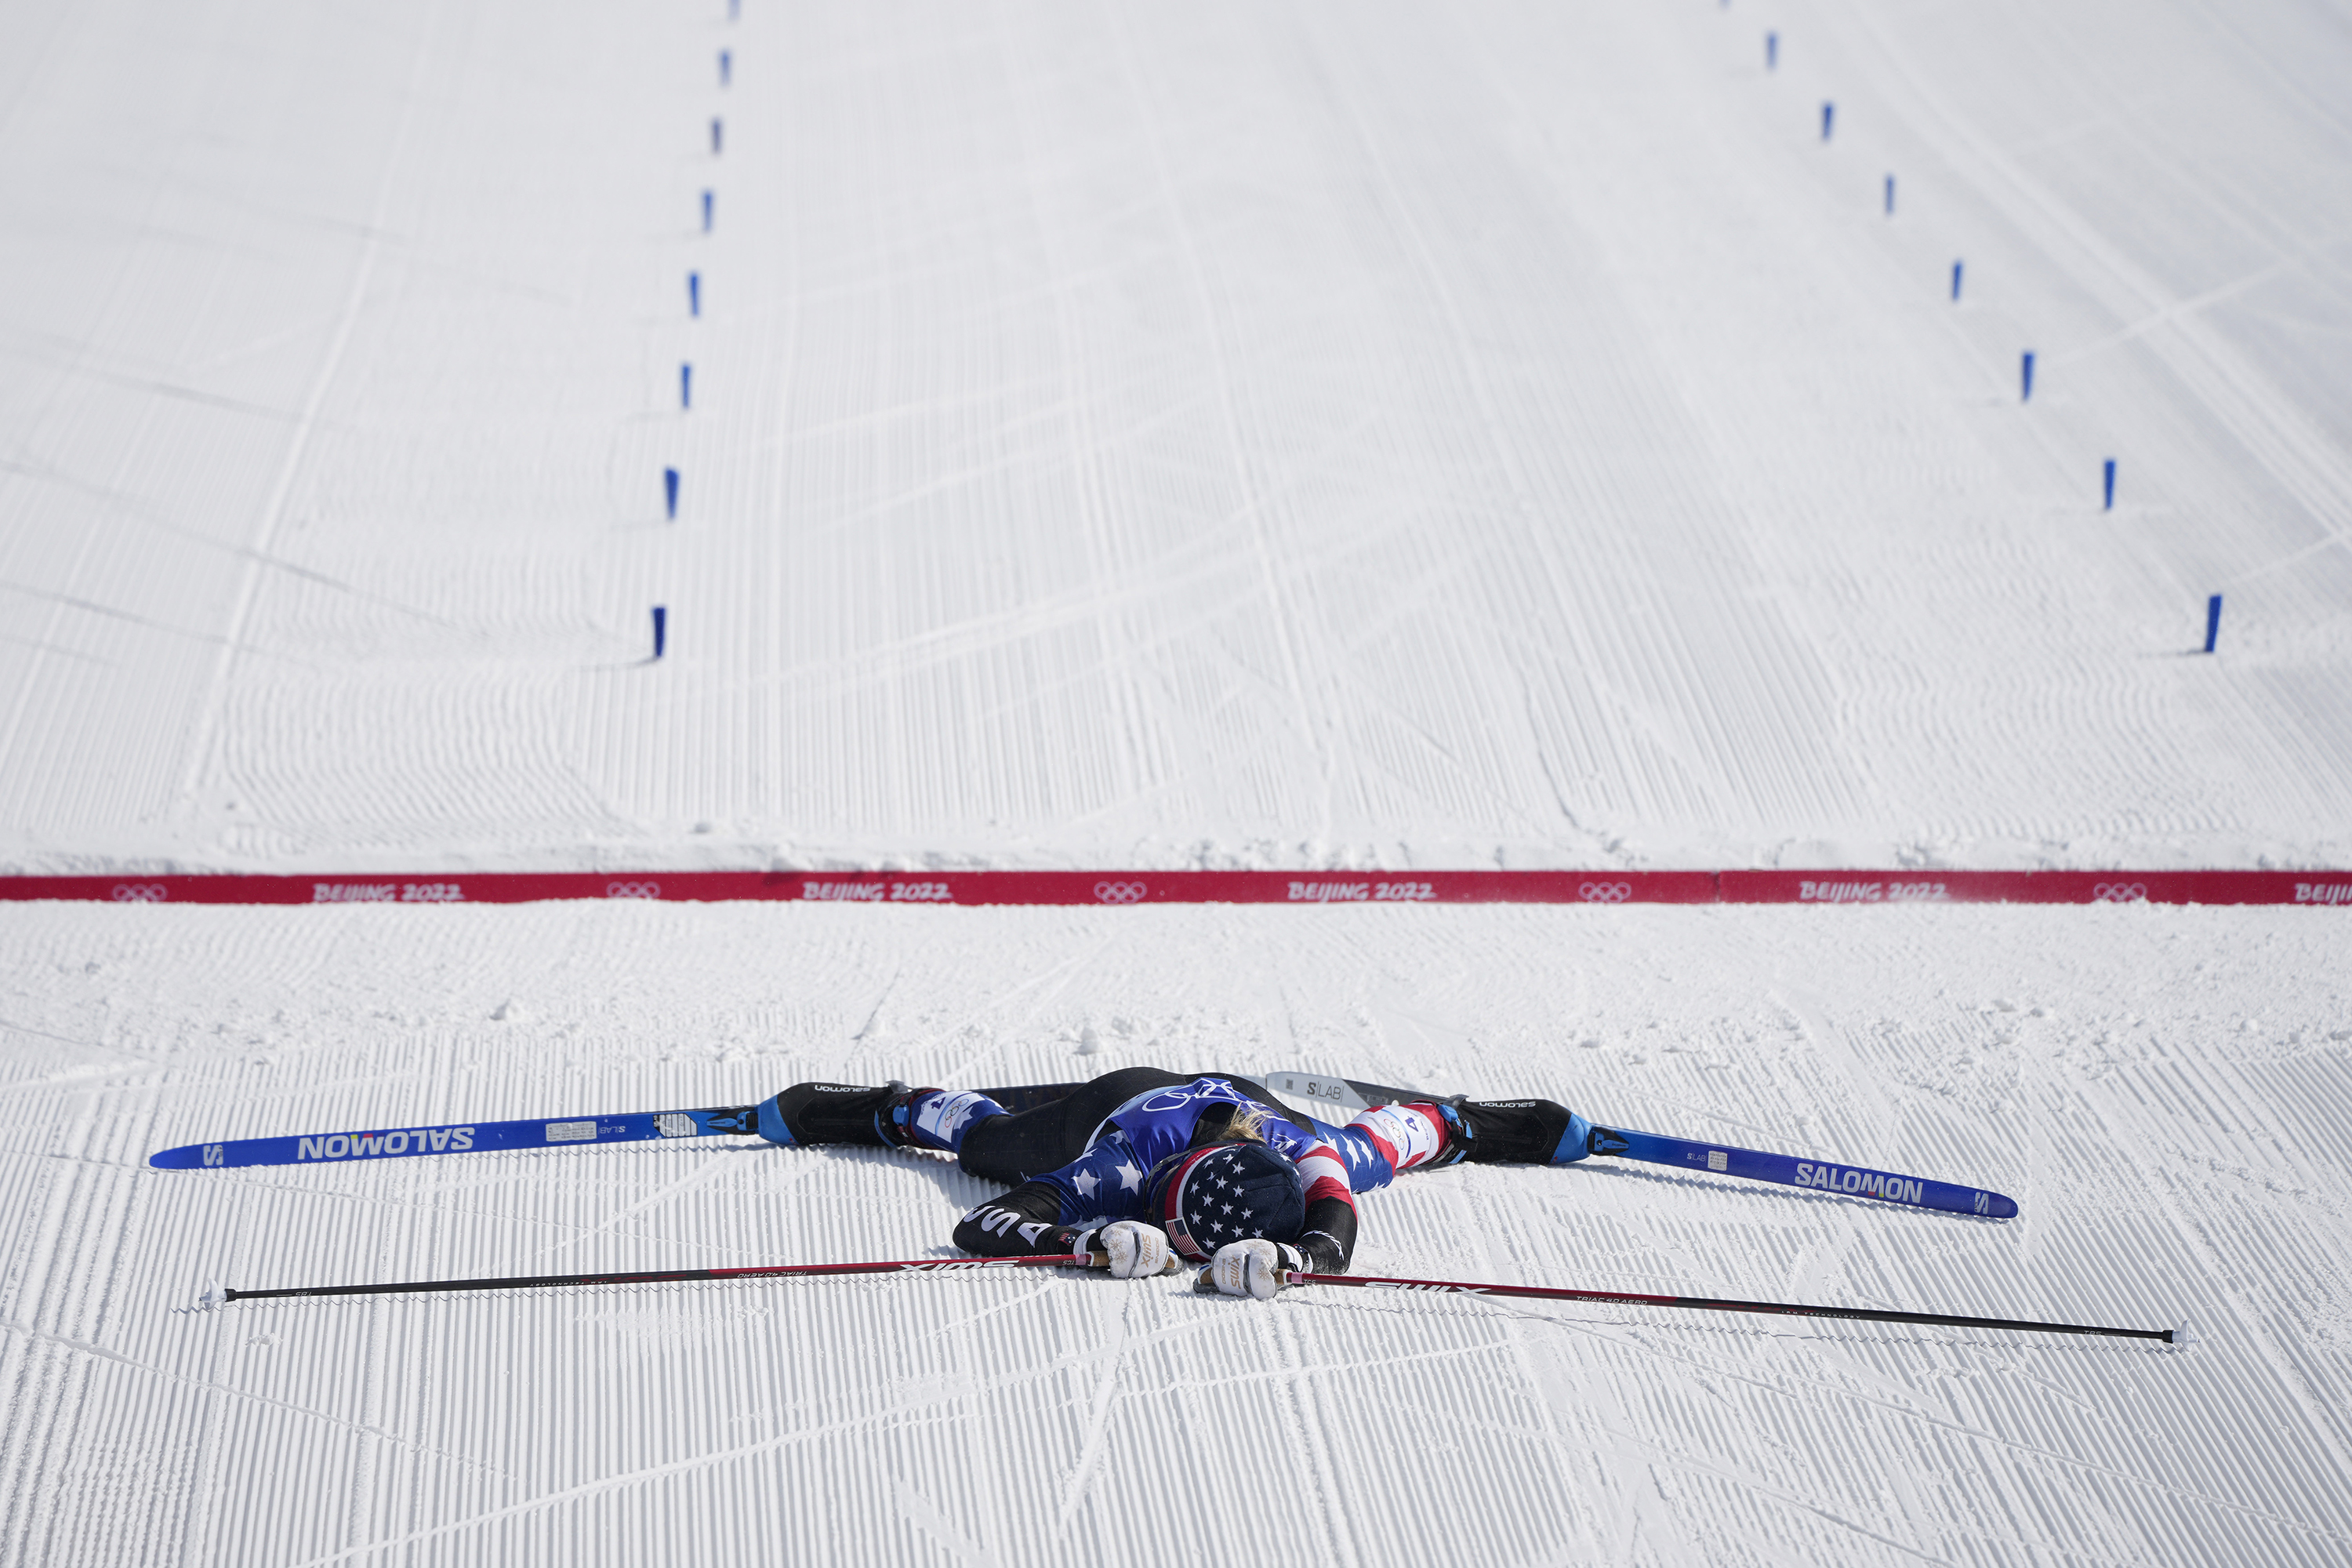 American cross-country skier Jessie Diggins lies on the snow after crossing the finish line of the 30-kilometer mass start event on Sunday. She won the silver, finishing behind Norway's Therese Johaug.